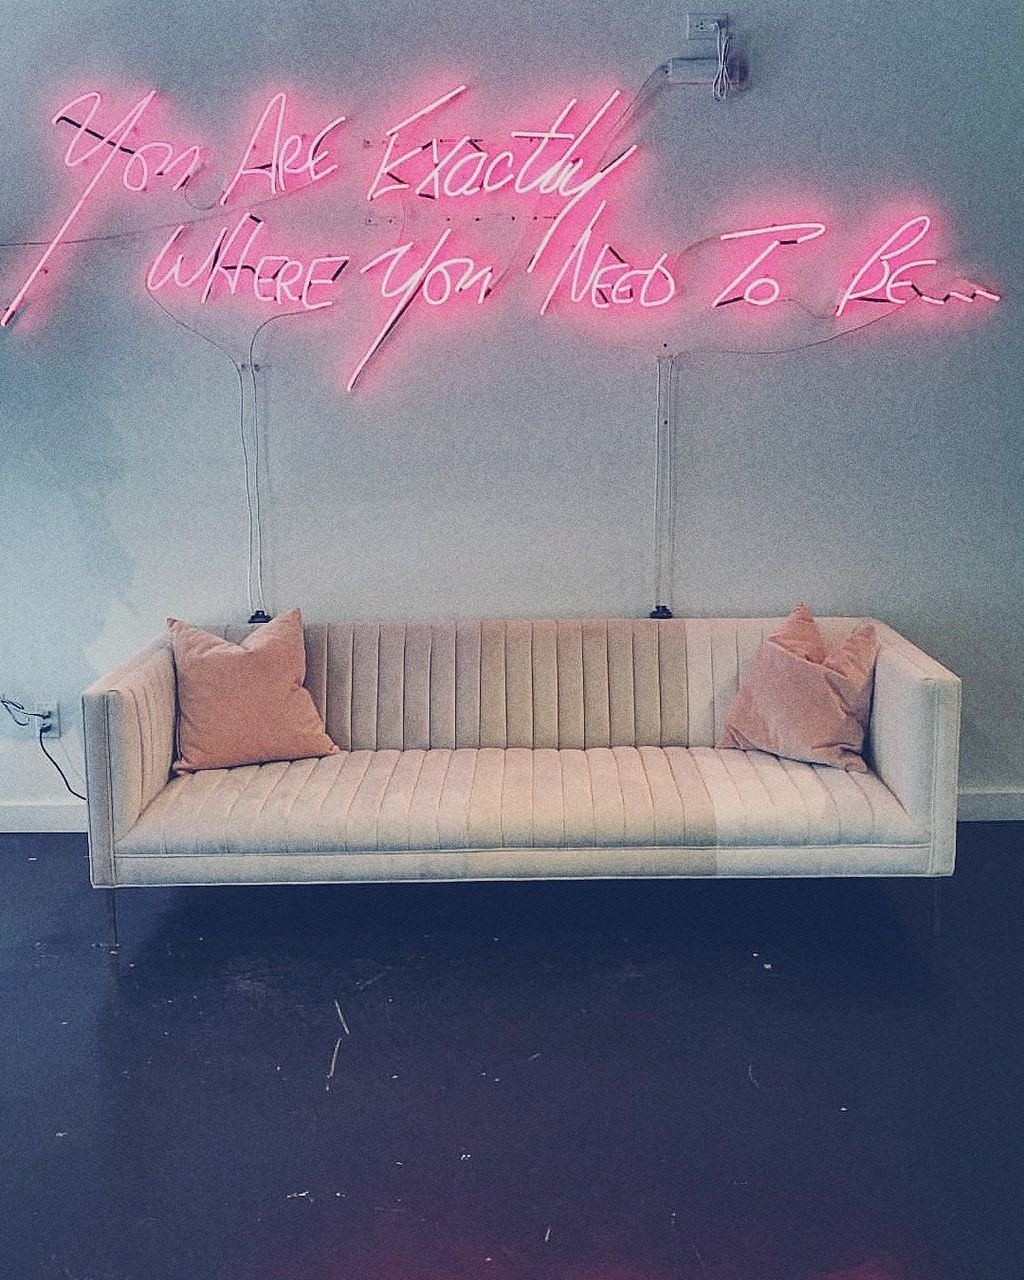 text, indoors, western script, furniture, communication, sofa, no people, pink color, pillow, absence, domestic room, home interior, lighting equipment, stuffed, bed, illuminated, cushion, sign, day, seat